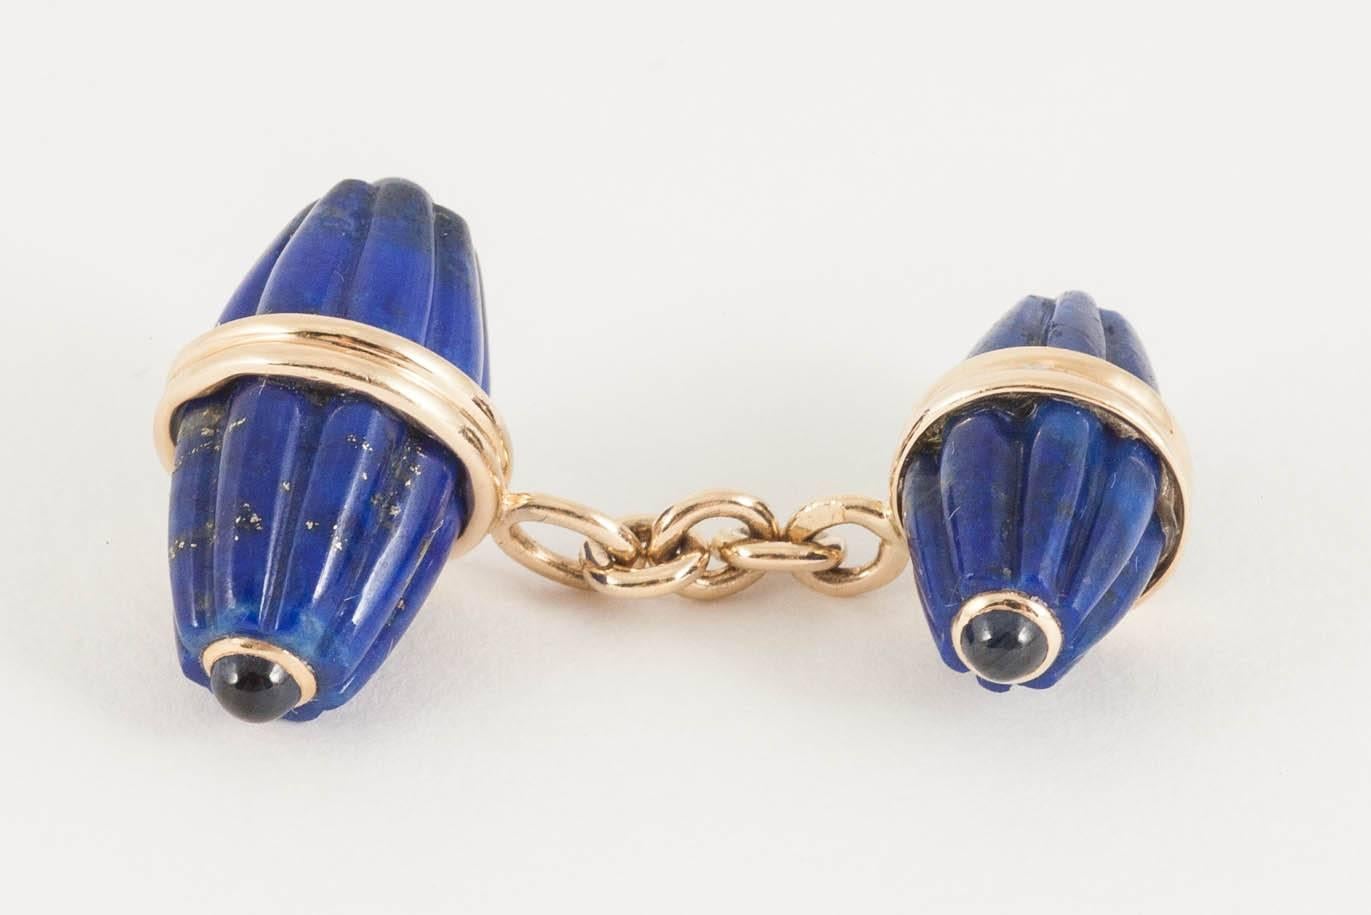 A Vintage pair of melon shaped, fluted, lapis lazuli, double sided cufflinks of two sizes, each terminal set with a cabochon sapphire and mounted in 18 karat yellow gold.
Larger lapis lazuli link measures 20mm in height x 10mm in width.
1960's